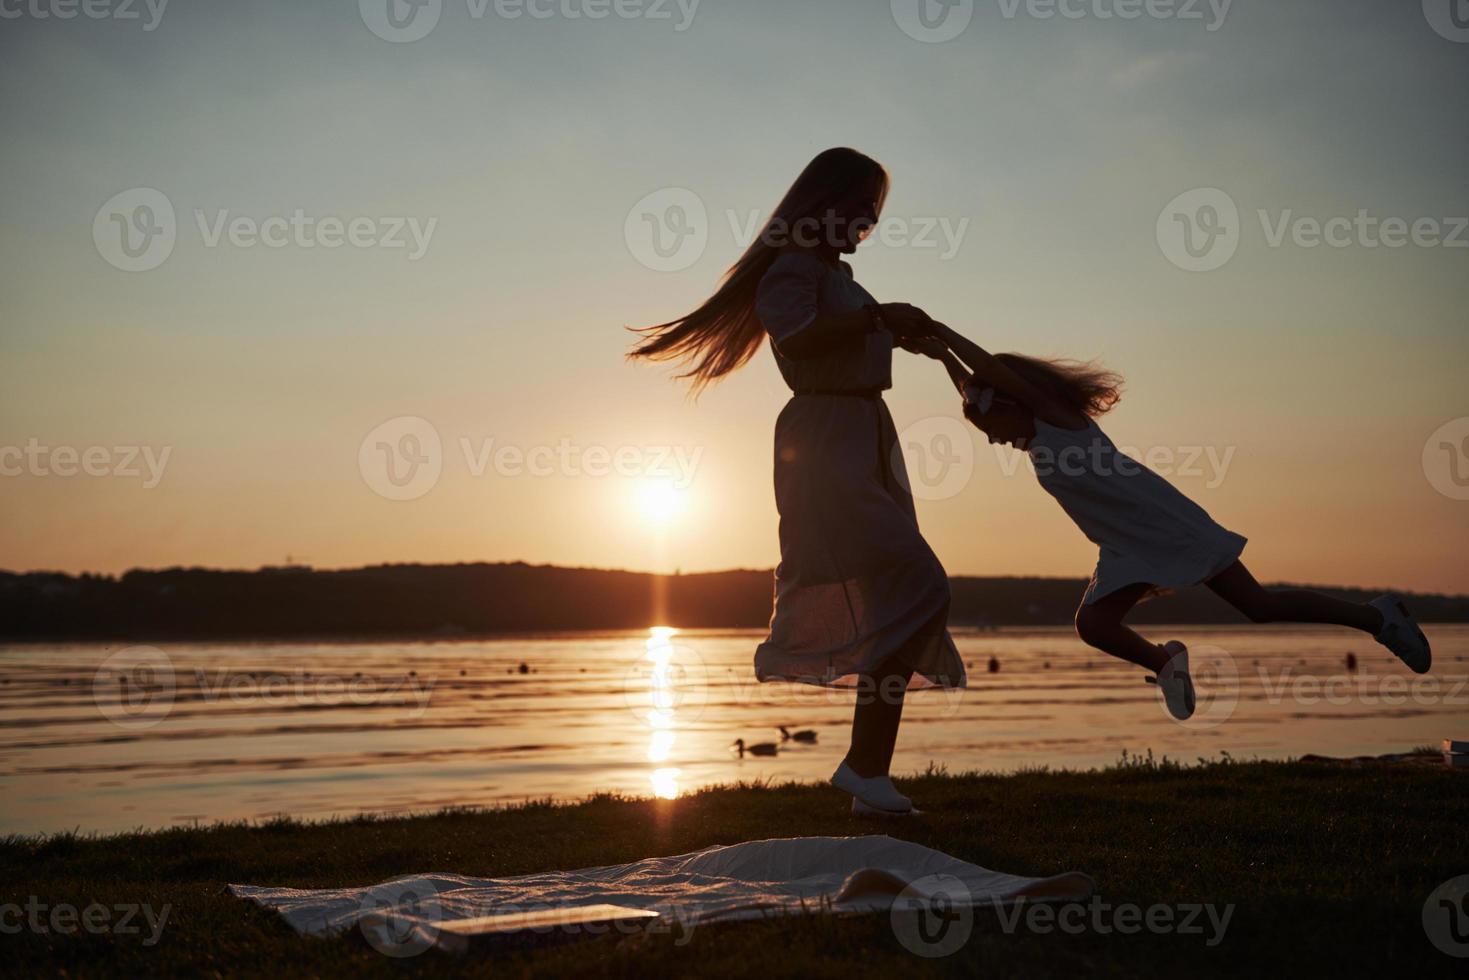 Mom plays with her baby on holidays near the ocean, silhouettes at sunset photo